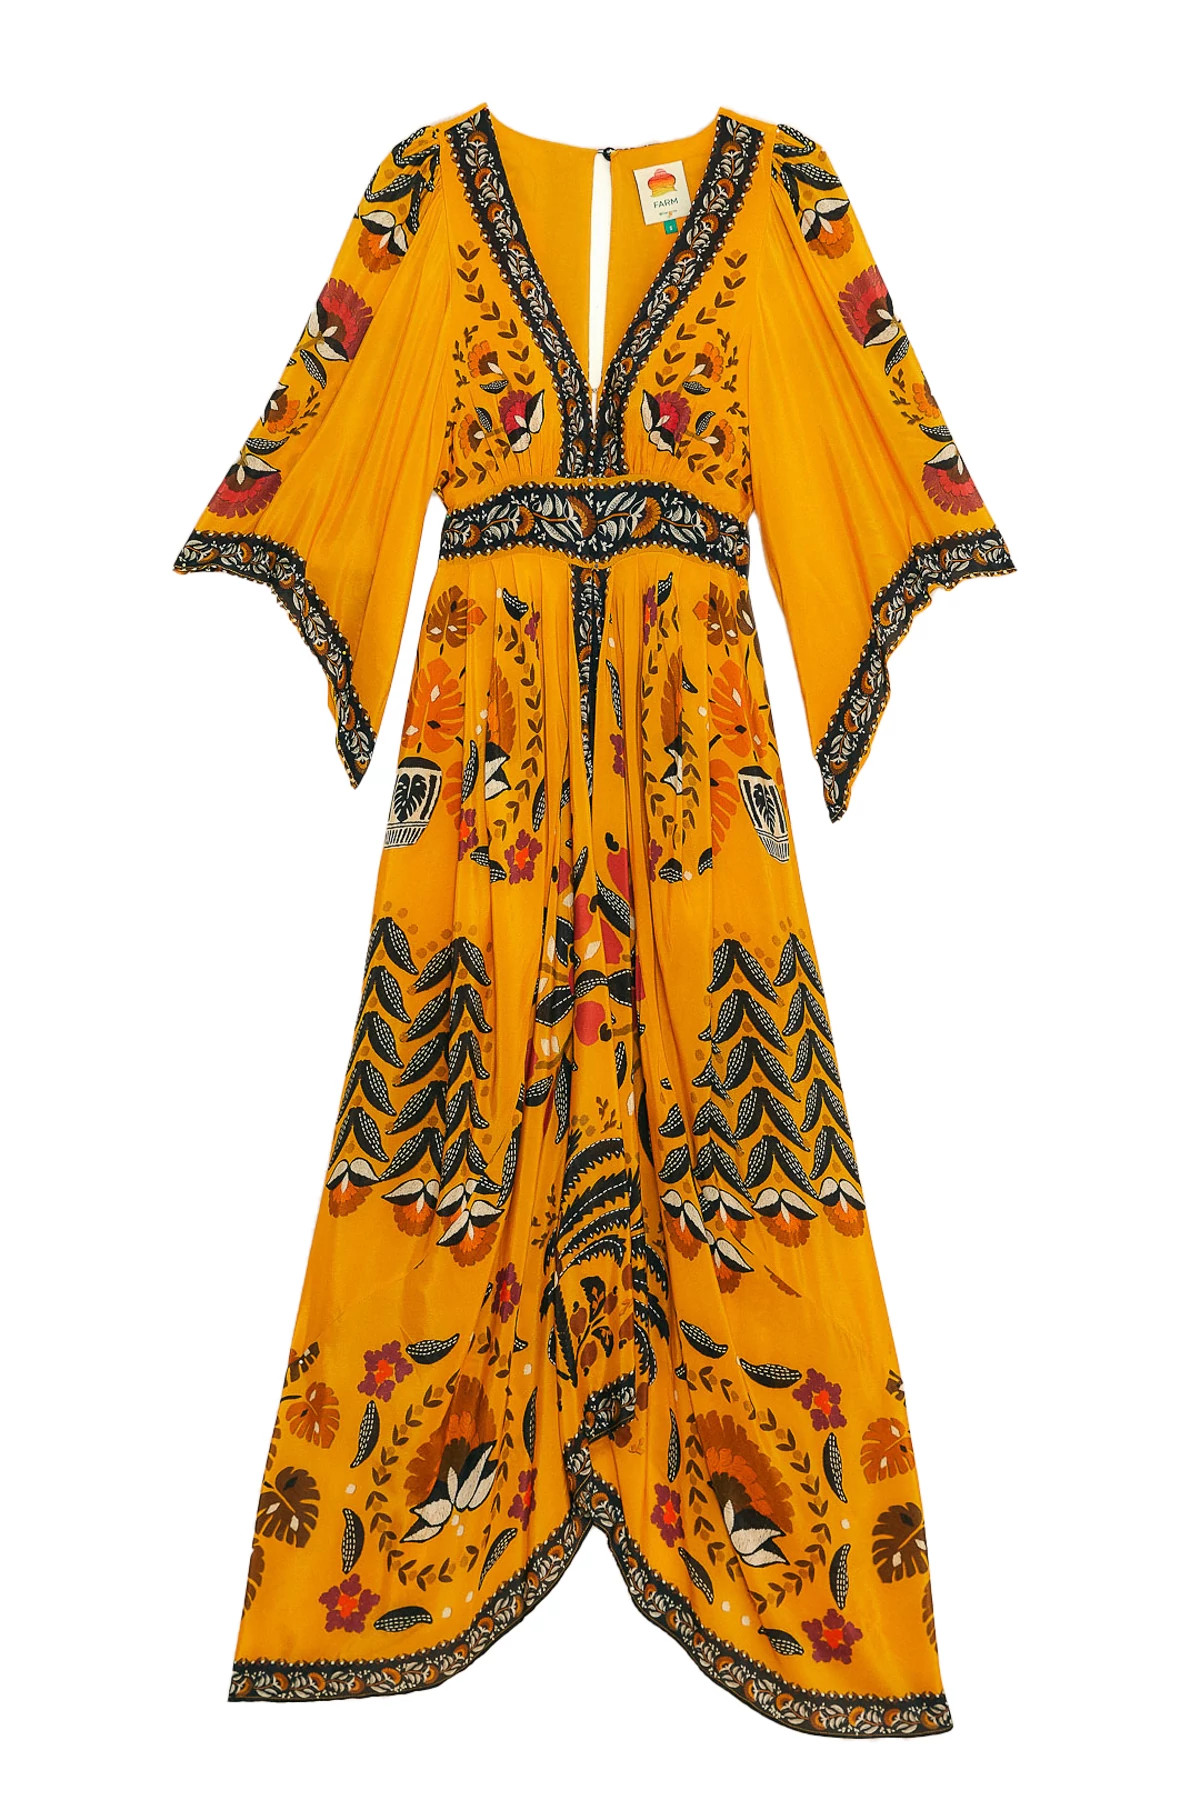 TROPICAL TAPESTRY Tropical Tapestry Caftan Dress image number 4